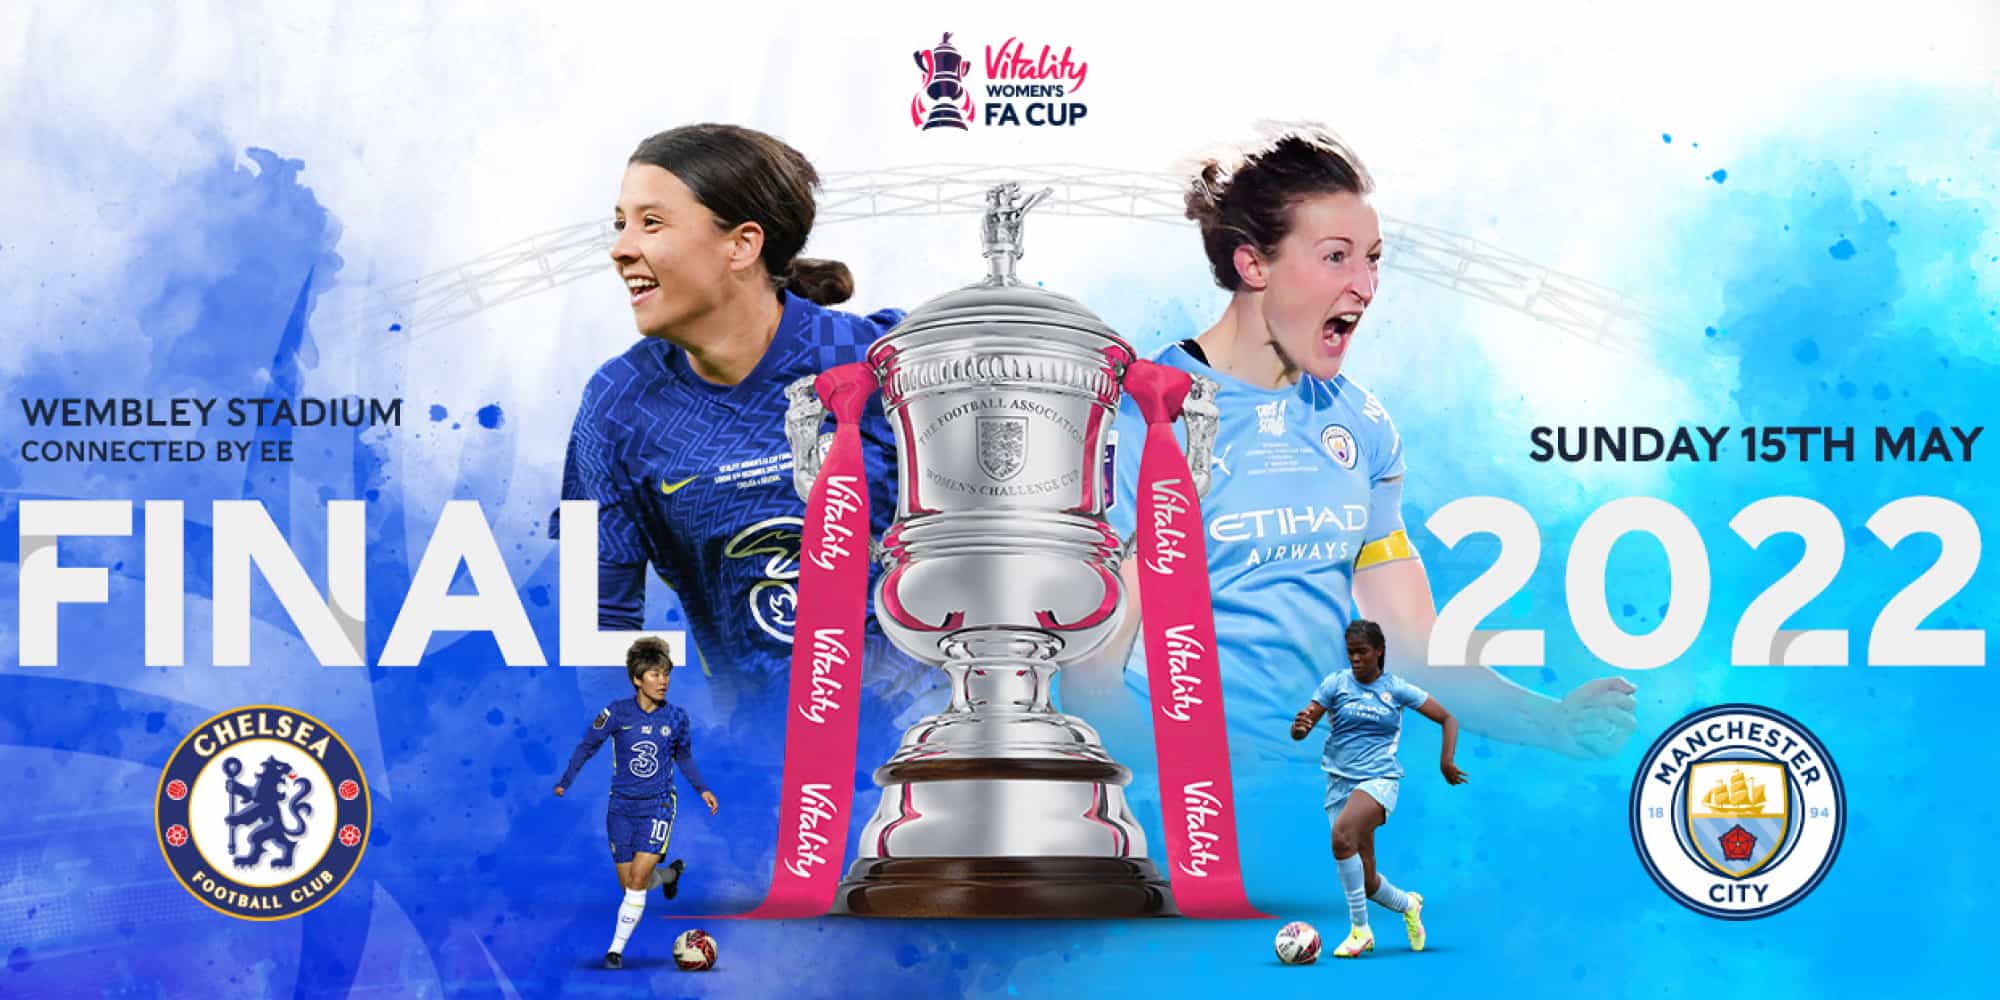 Women's FA Cup Final 2022 - Chelsea v Manchester City